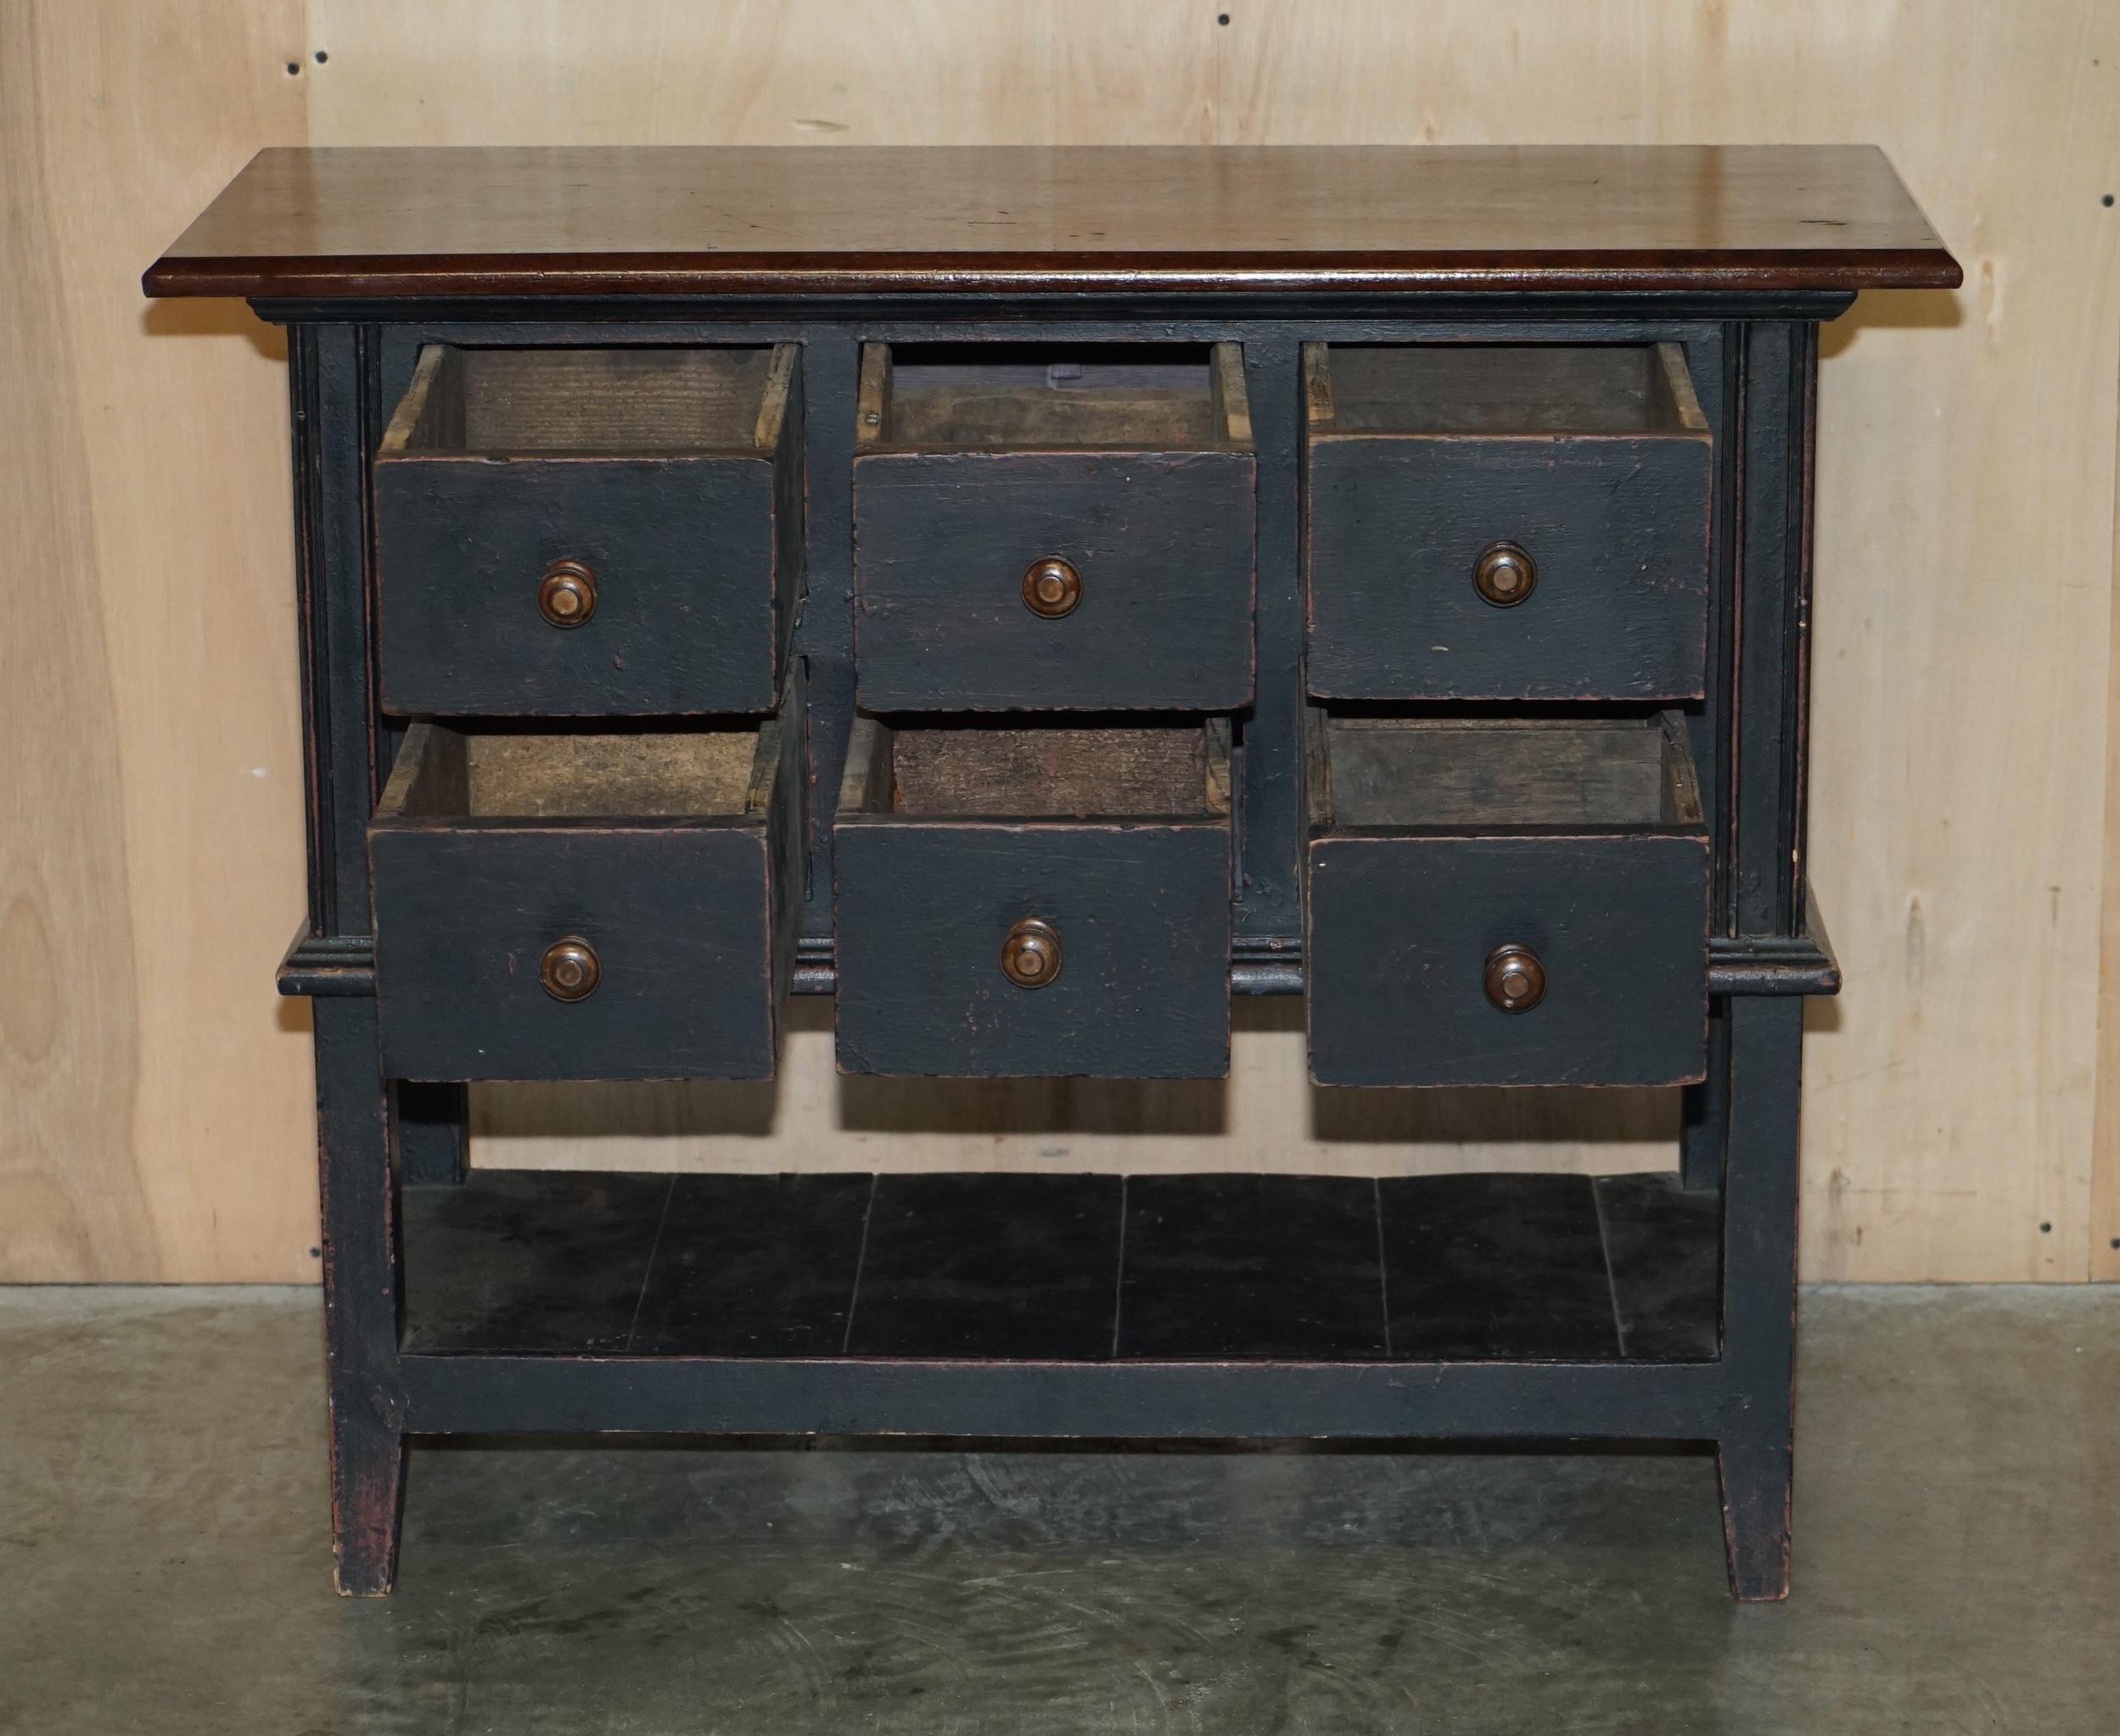 Victorian Oak Hand Painted Haberdashery Apothecary Sideboard Chest of Drawers 7